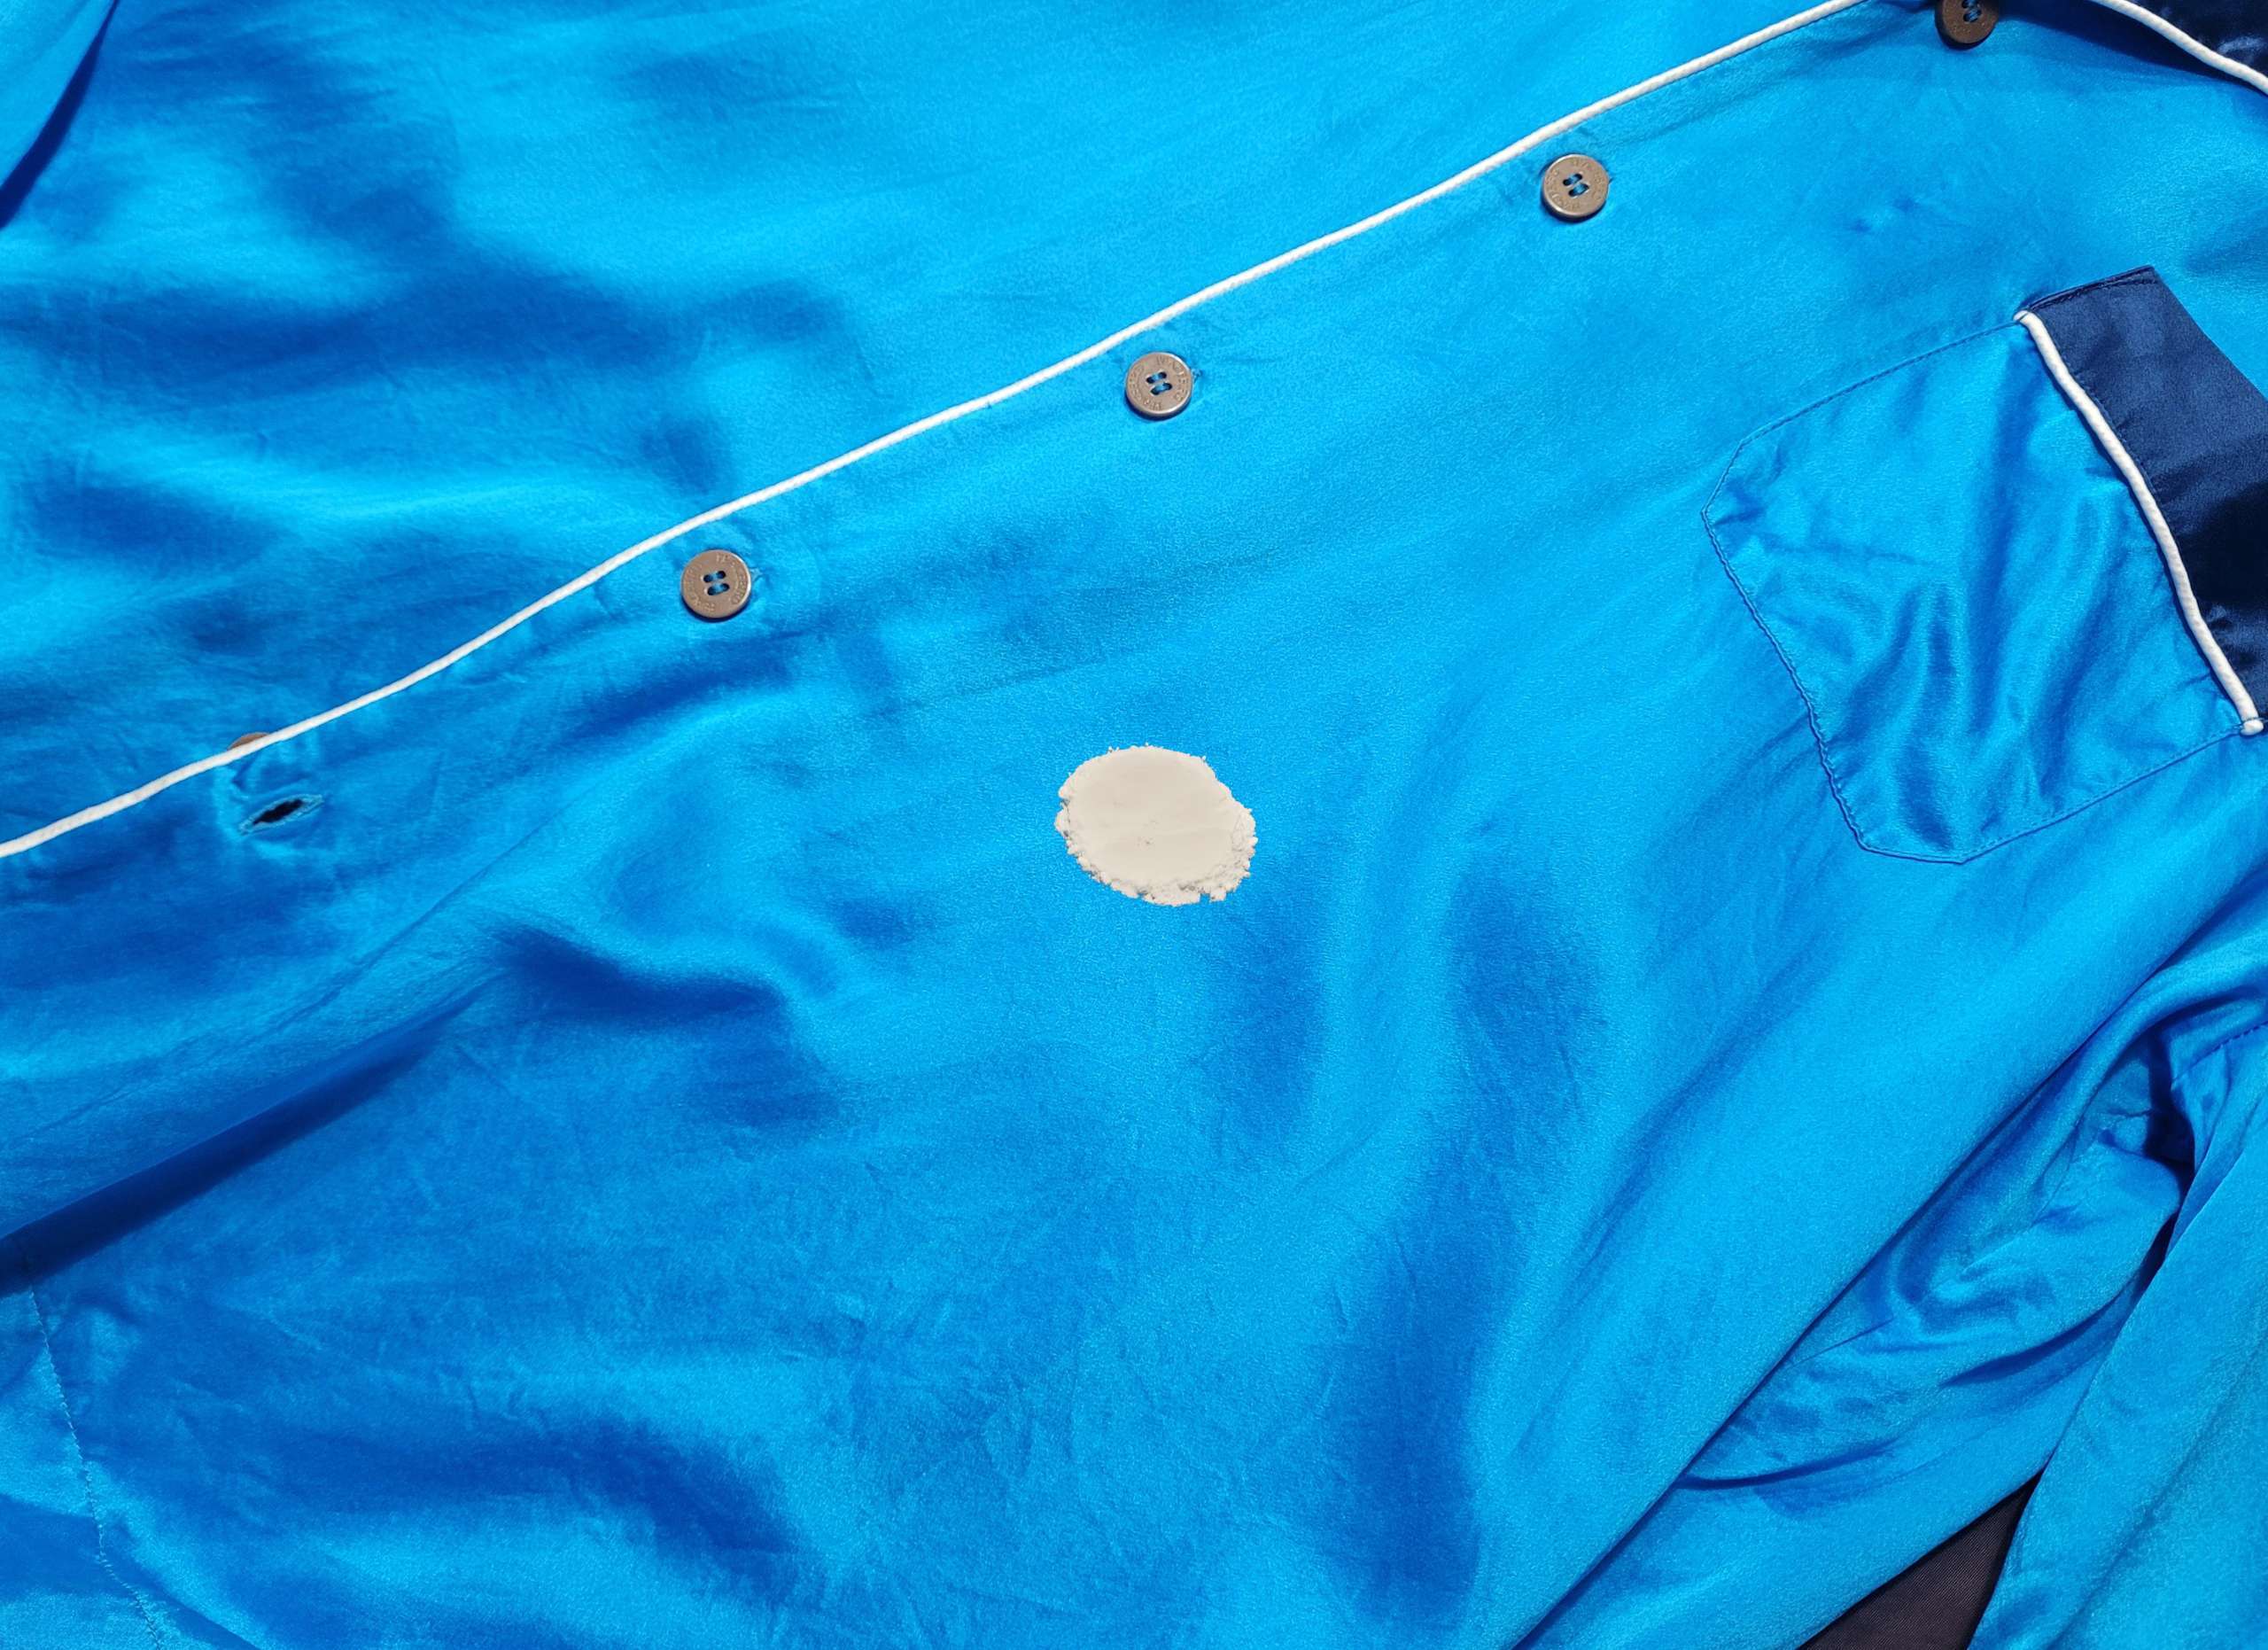 photo of baking soda covering a stain on a satin shirt